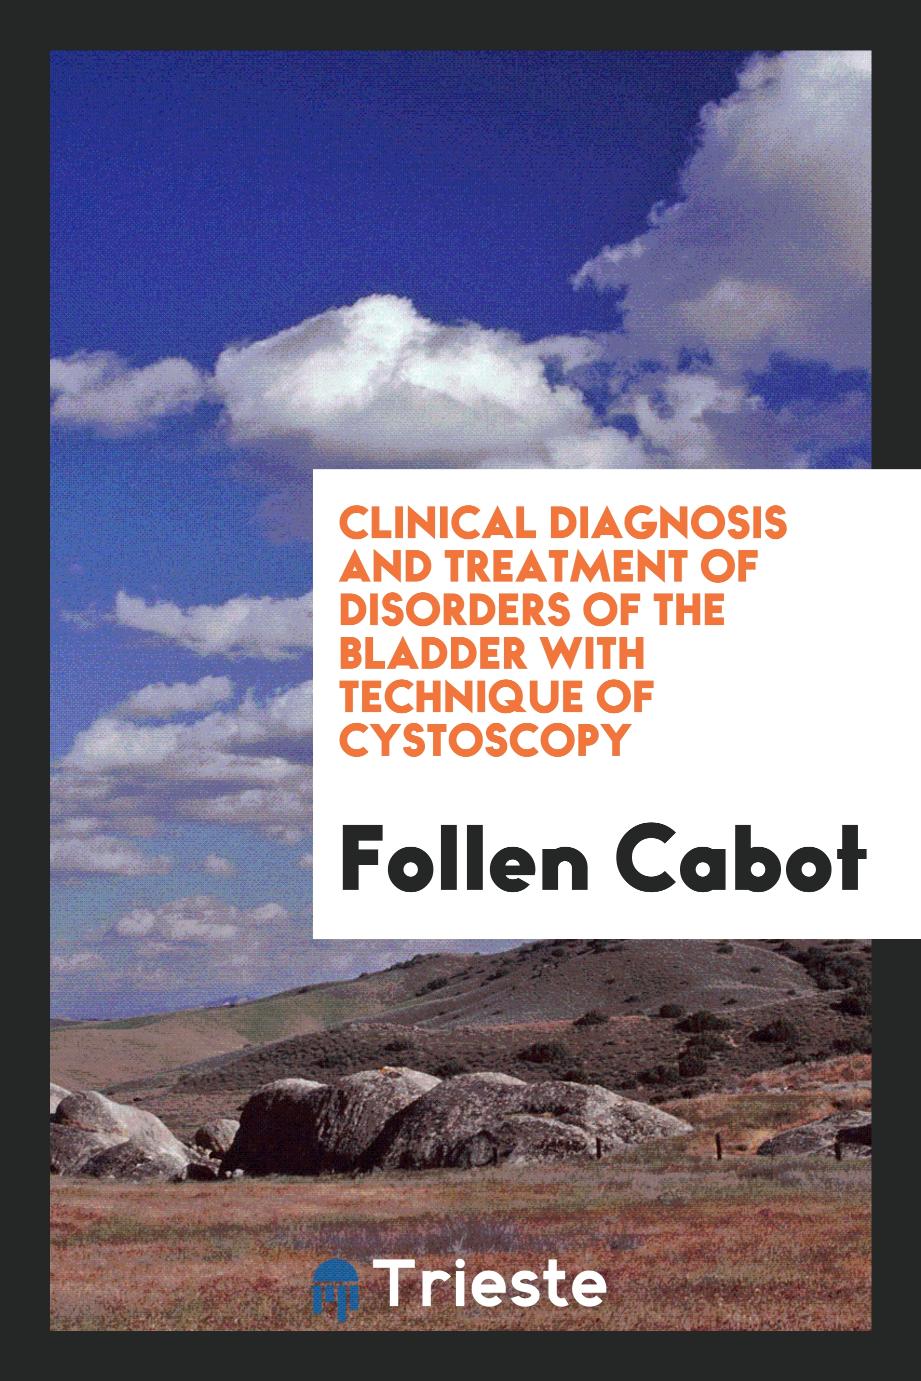 Clinical Diagnosis and Treatment of Disorders of the Bladder with Technique of Cystoscopy